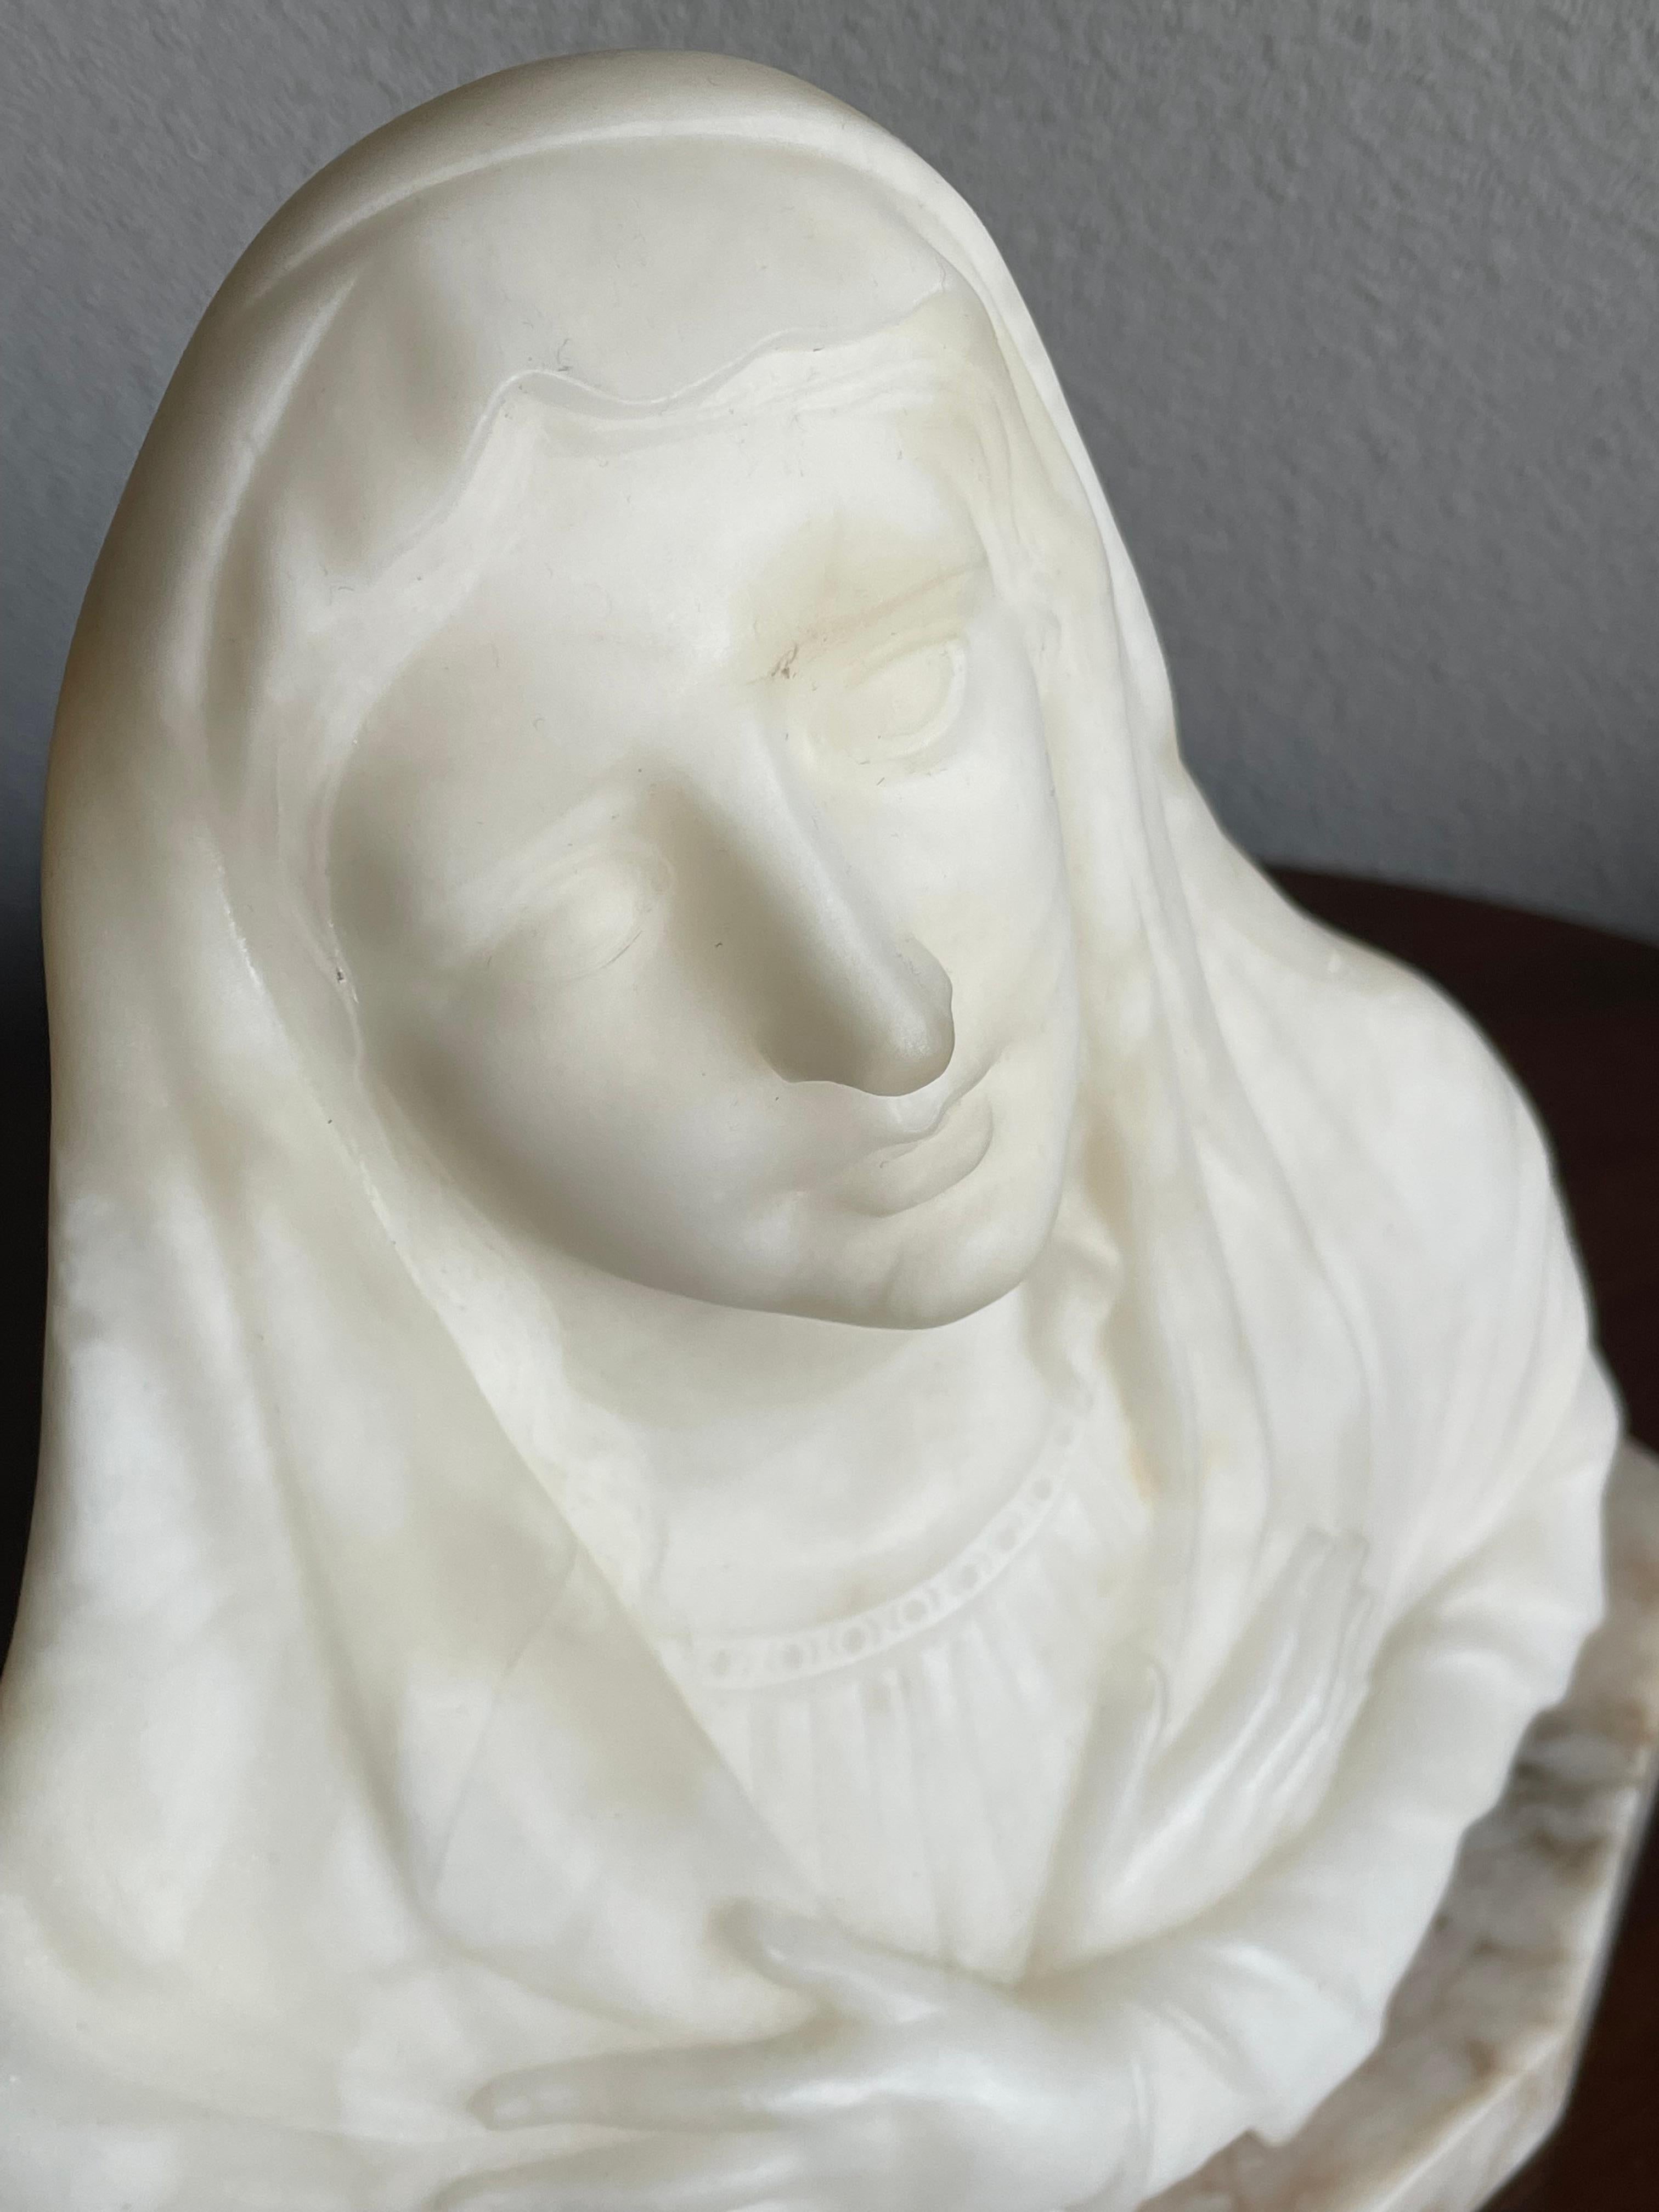 Rare Hand Carved Early 1900s Alabaster Bust Sculpture of a Mourning Virgin Mary 3